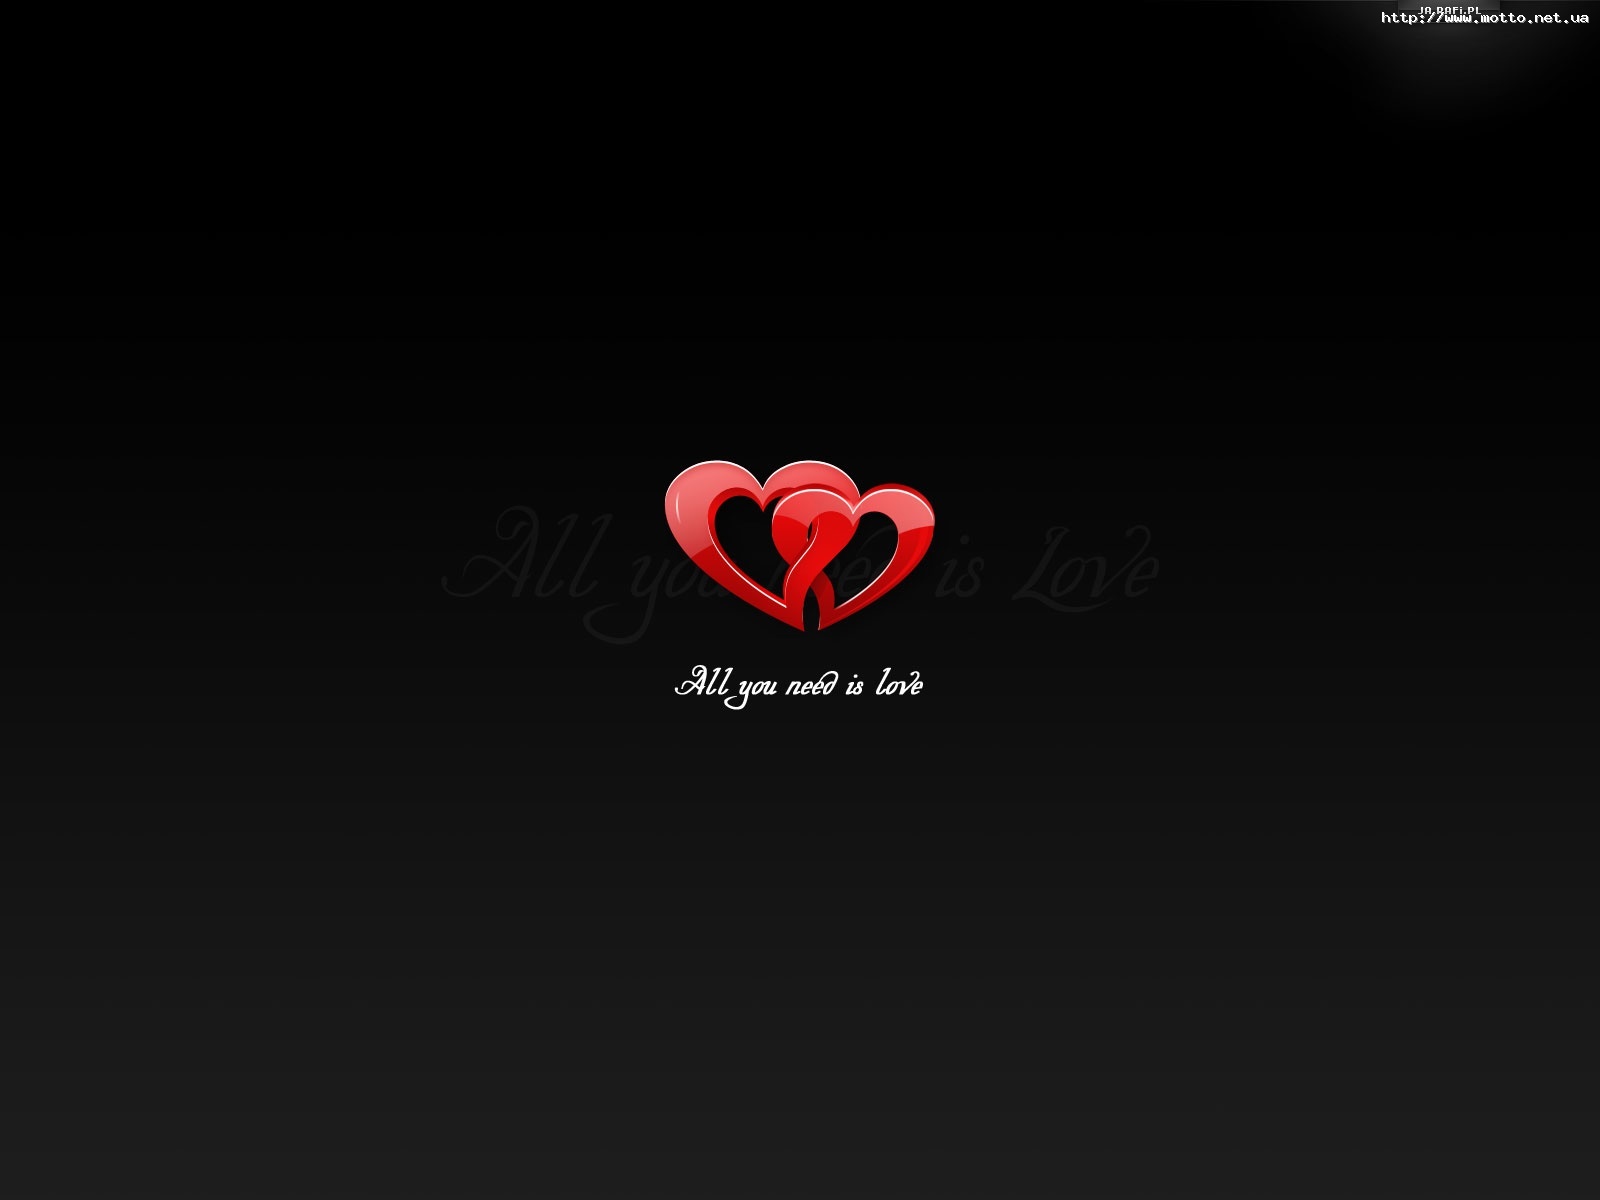 hearts, background, black, love, holidays, valentine's day images